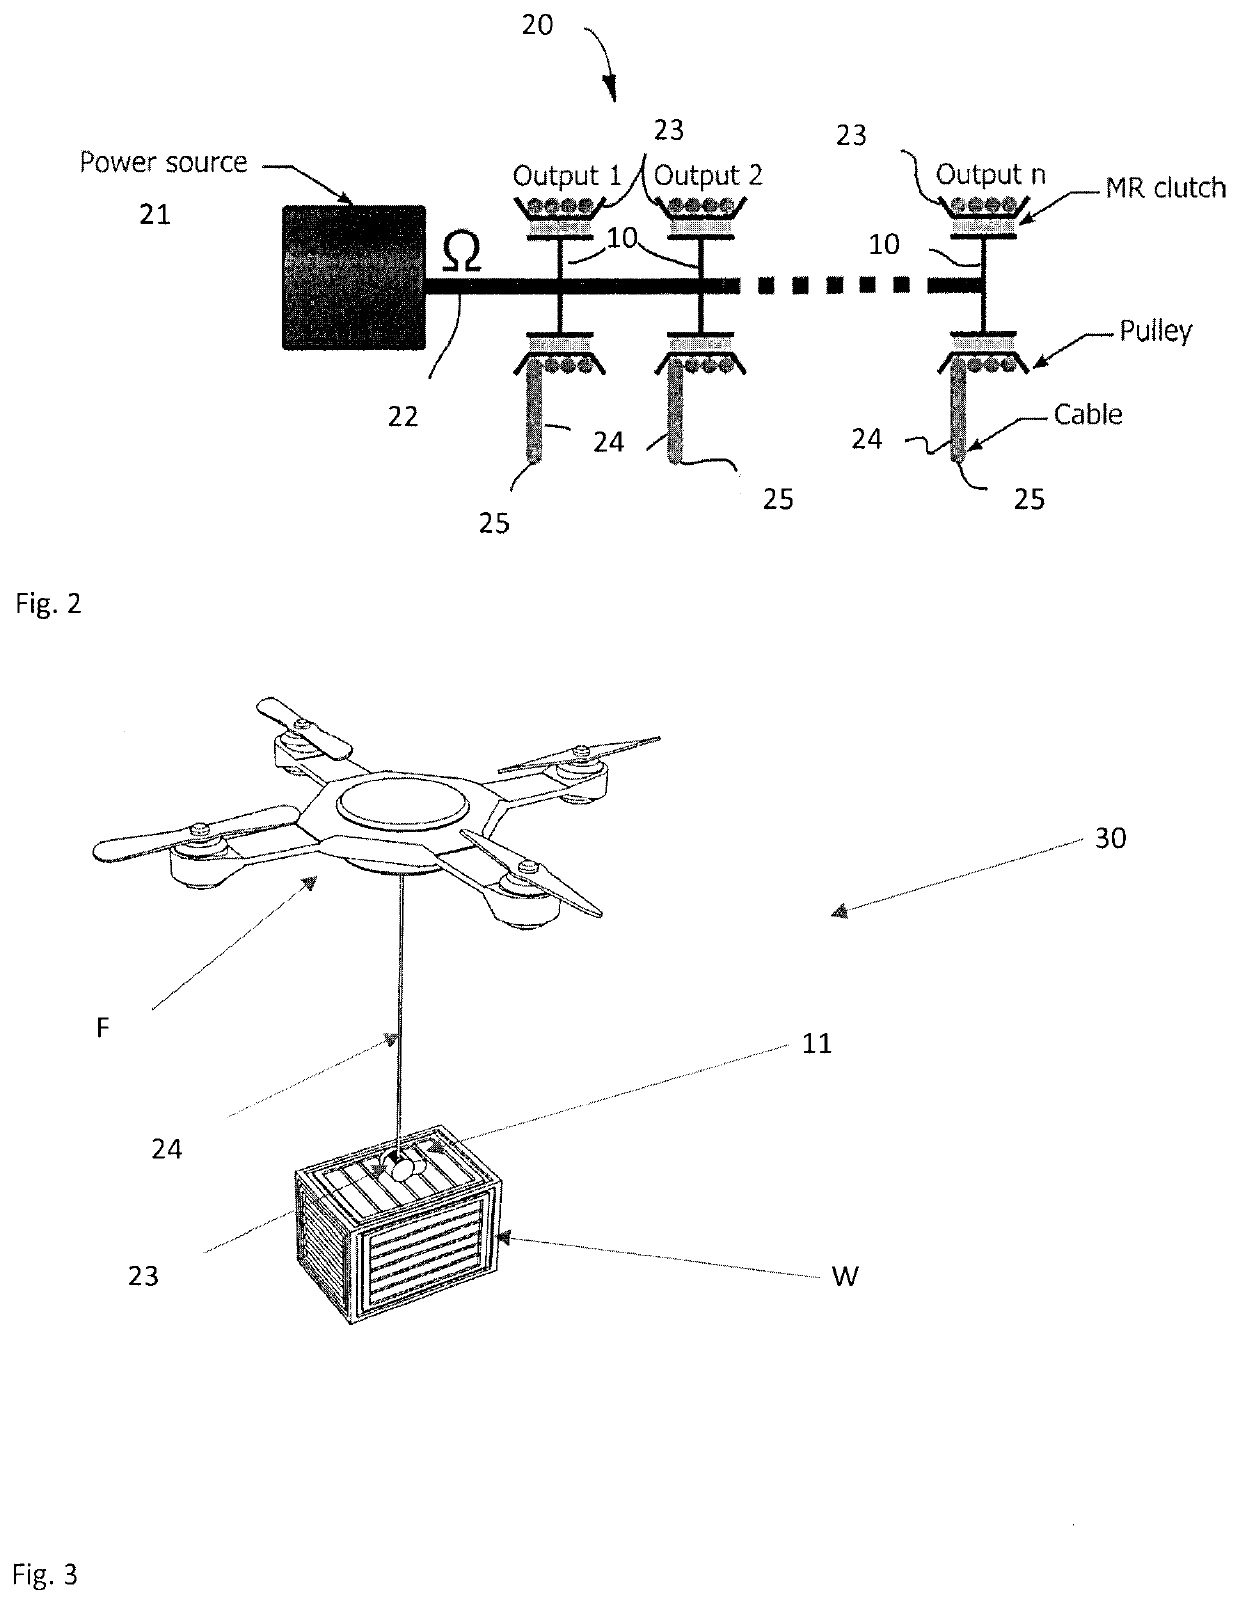 Tethered payload motion control and cable robot using magnetorheological actuators